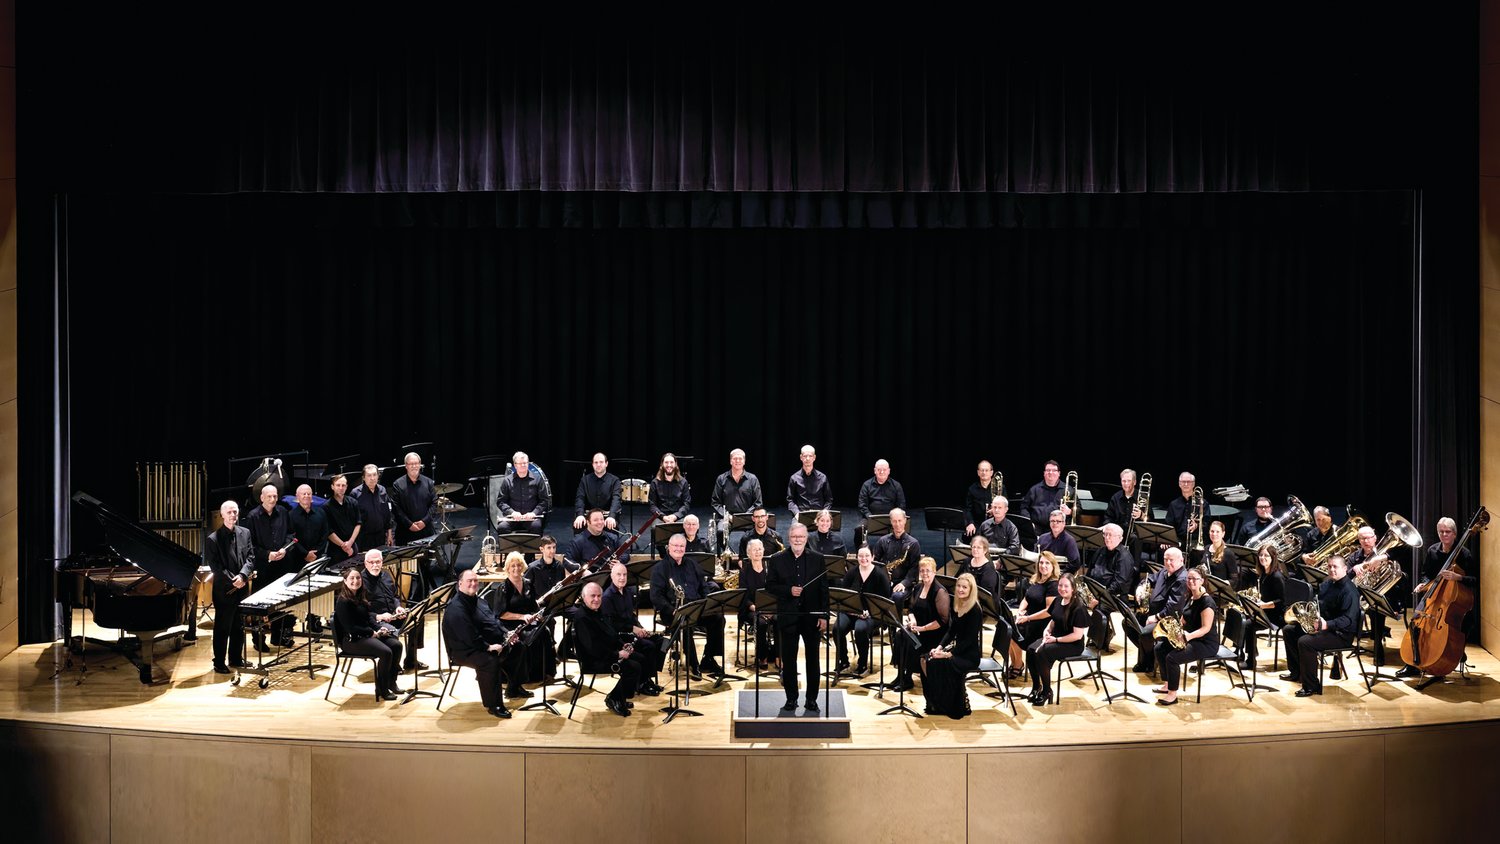 CONTRIBUTED PHOTO
The Delaware Valley Wind Symphony is a concert wind ensemble, under the direction of Steven B. Sweetsir, comprised of 52 local musicians.